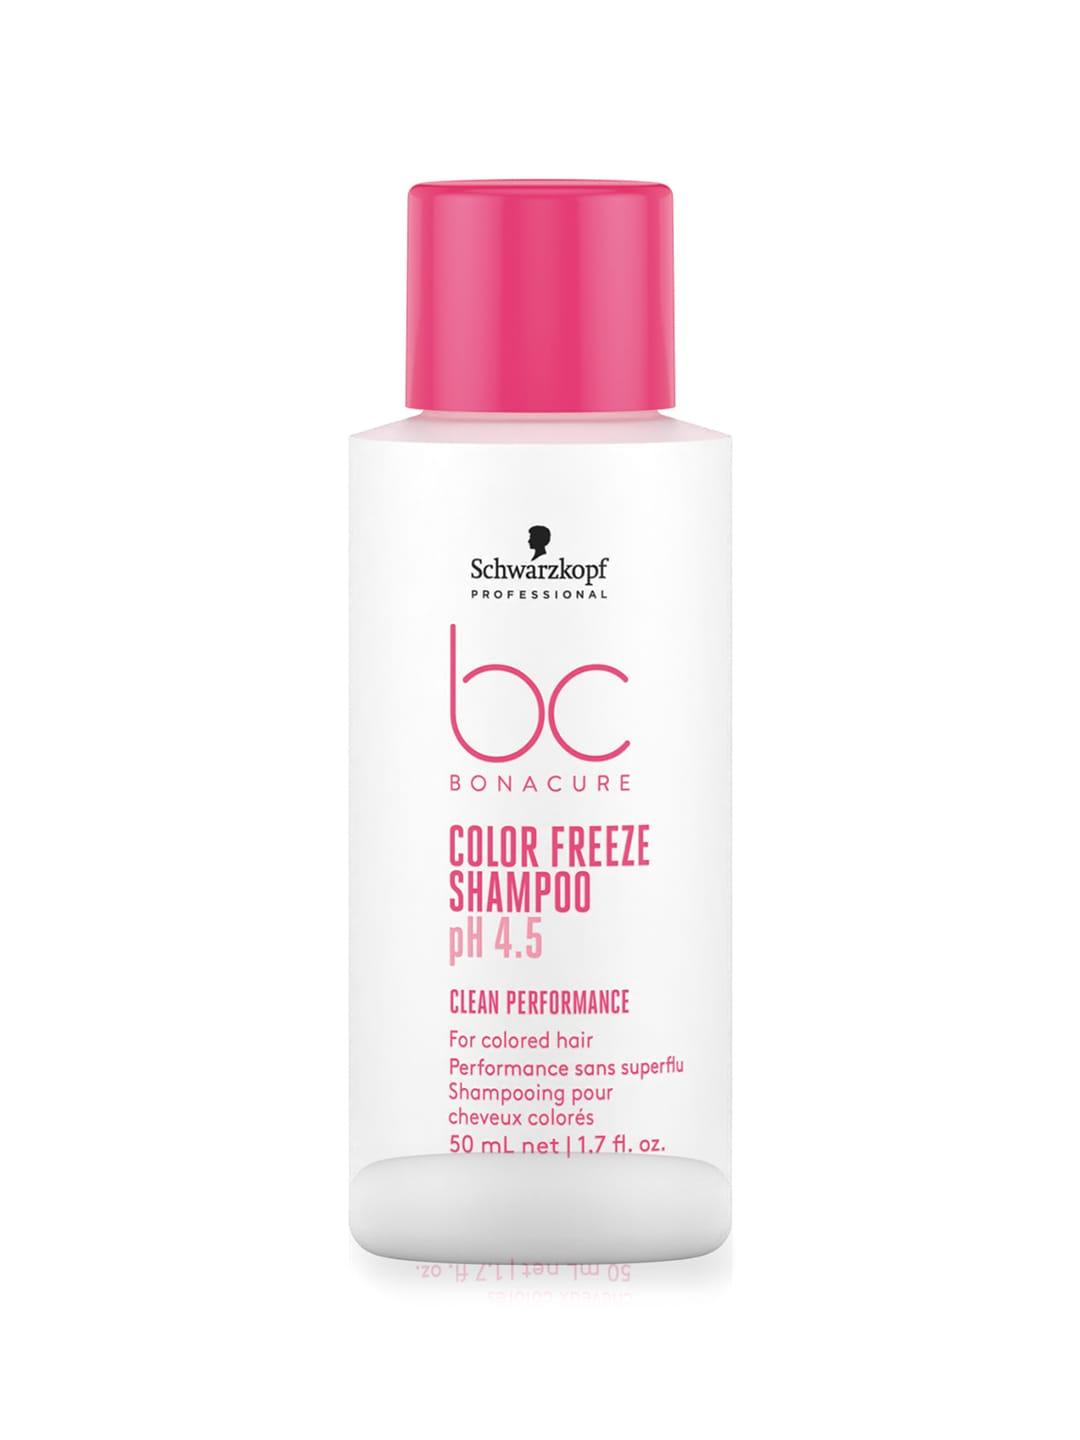 Schwarzkopf PROFESSIONAL Bonacure Color Freeze Shampoo pH4.5 for Colored Hair - 50ml